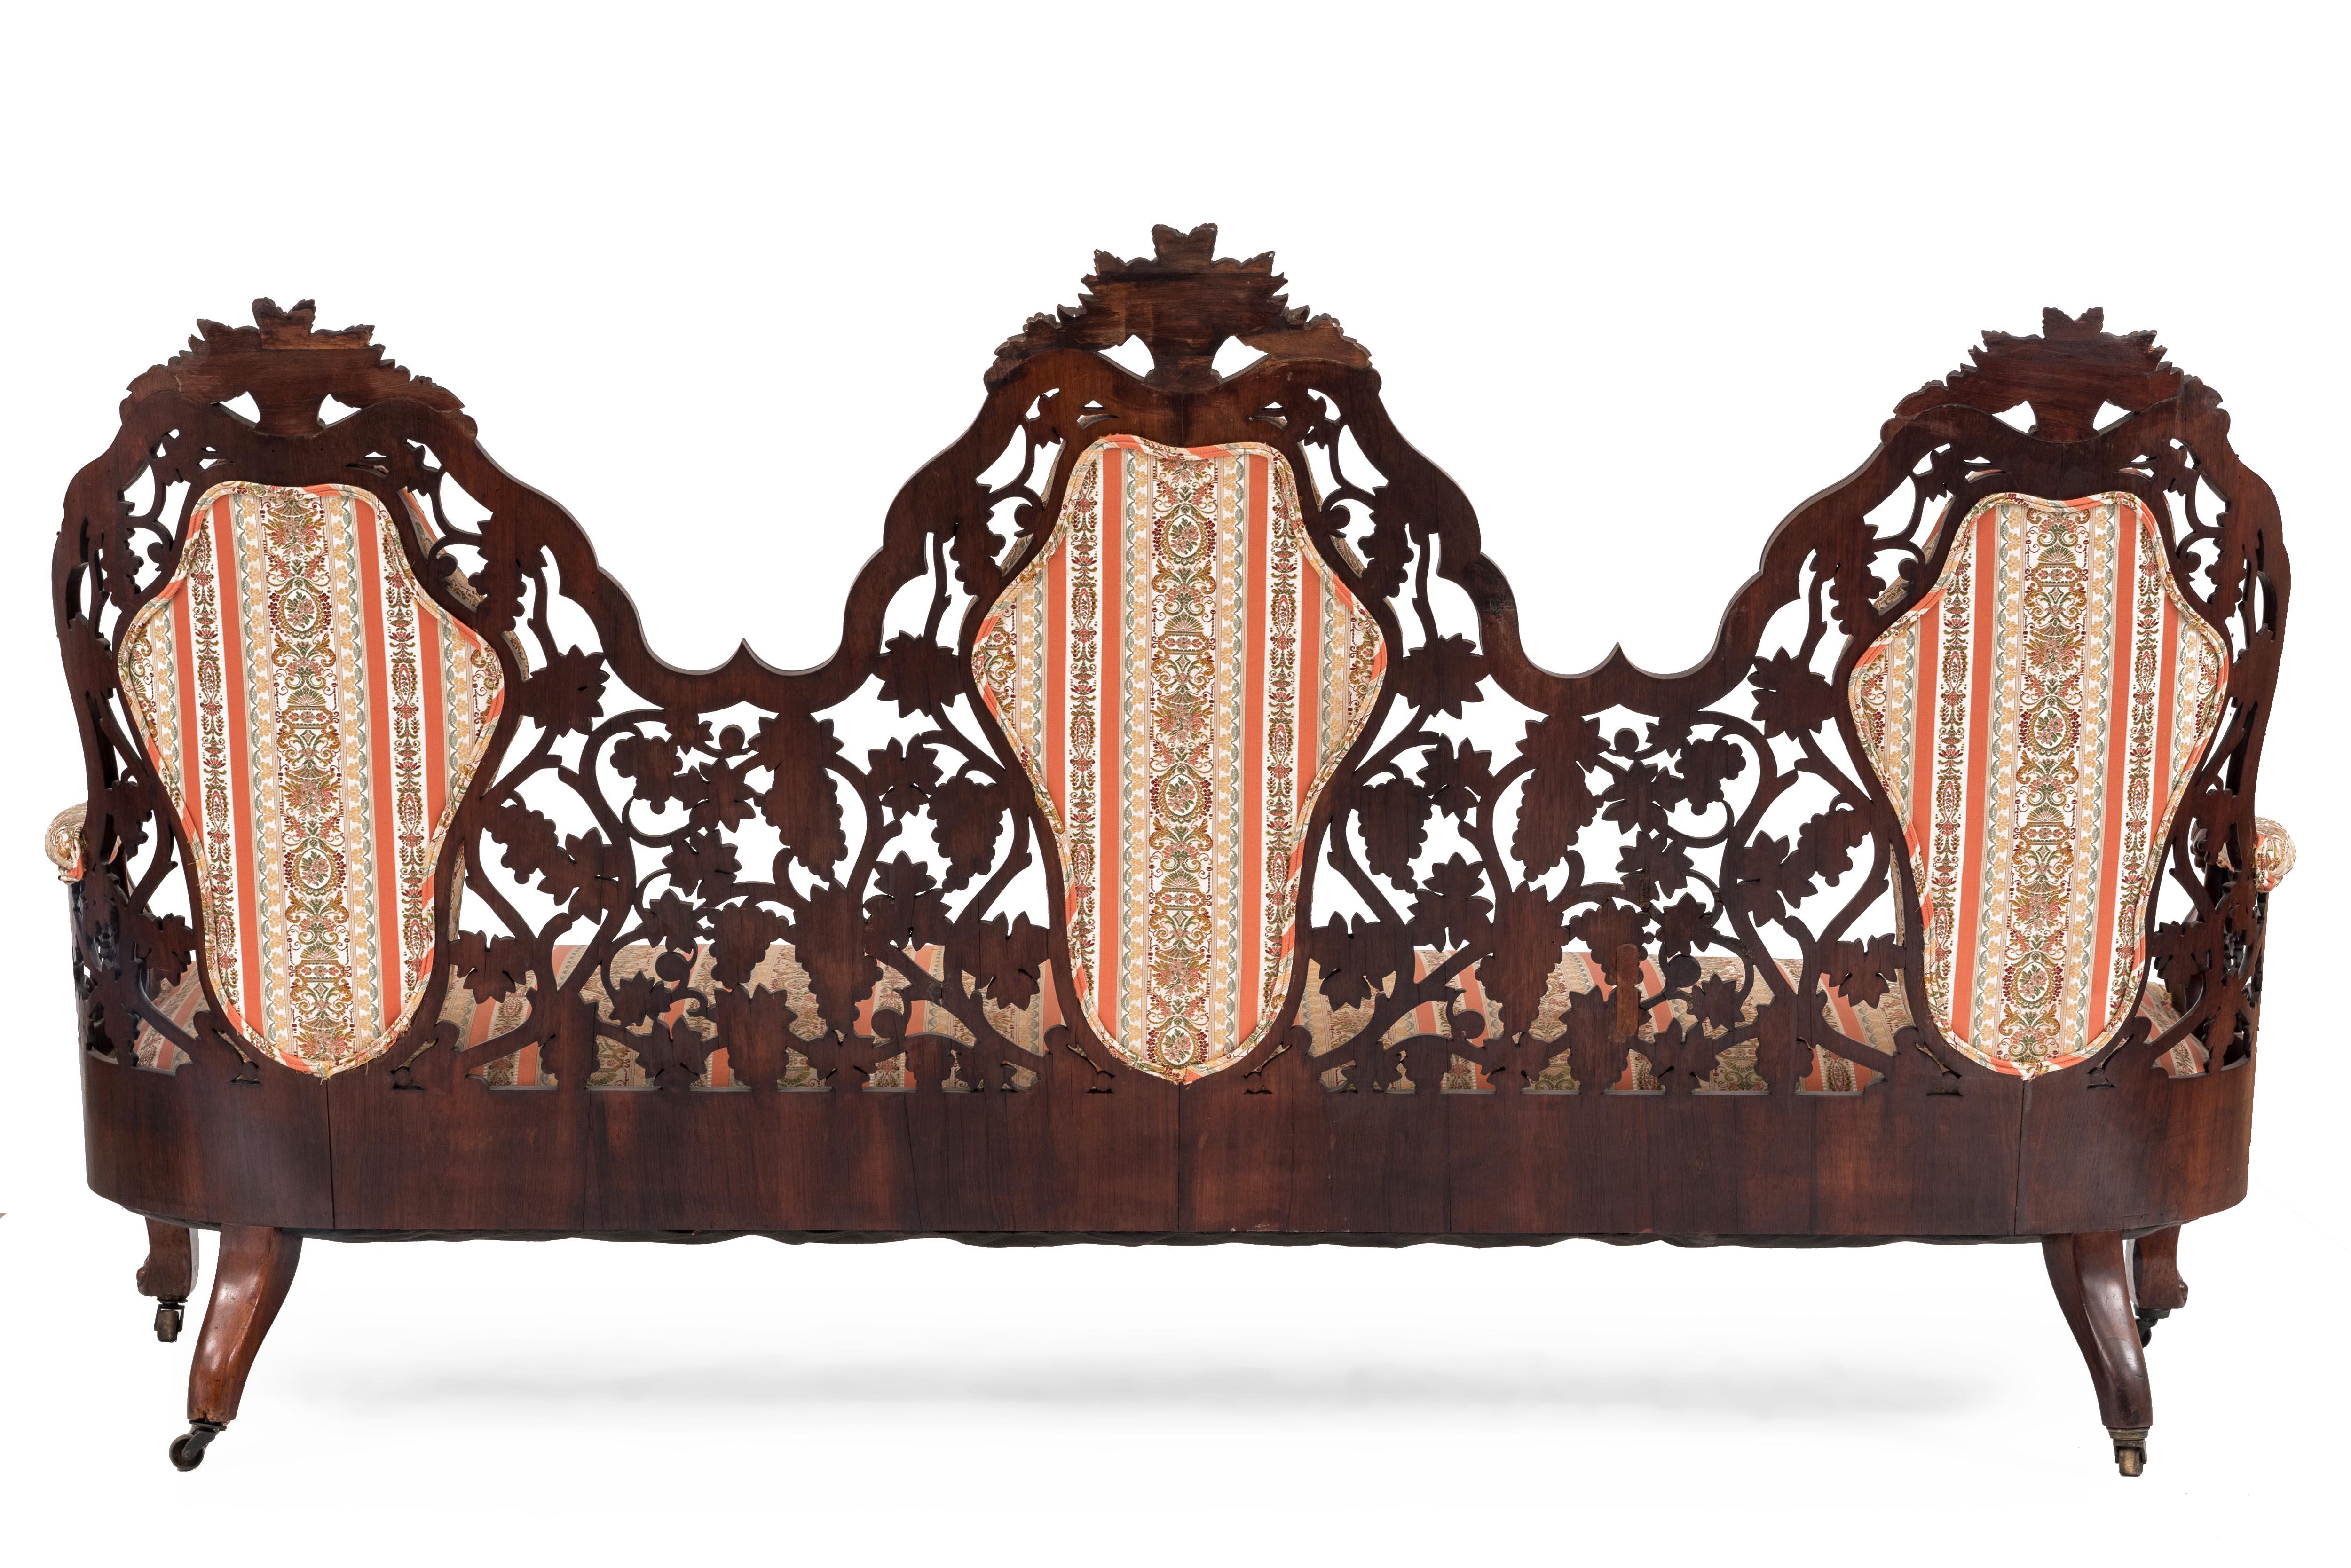 American Victorian rosewood triple filigree and upholstered back settee with stripe upholstery (att: JOHN HENRY BELTER)
